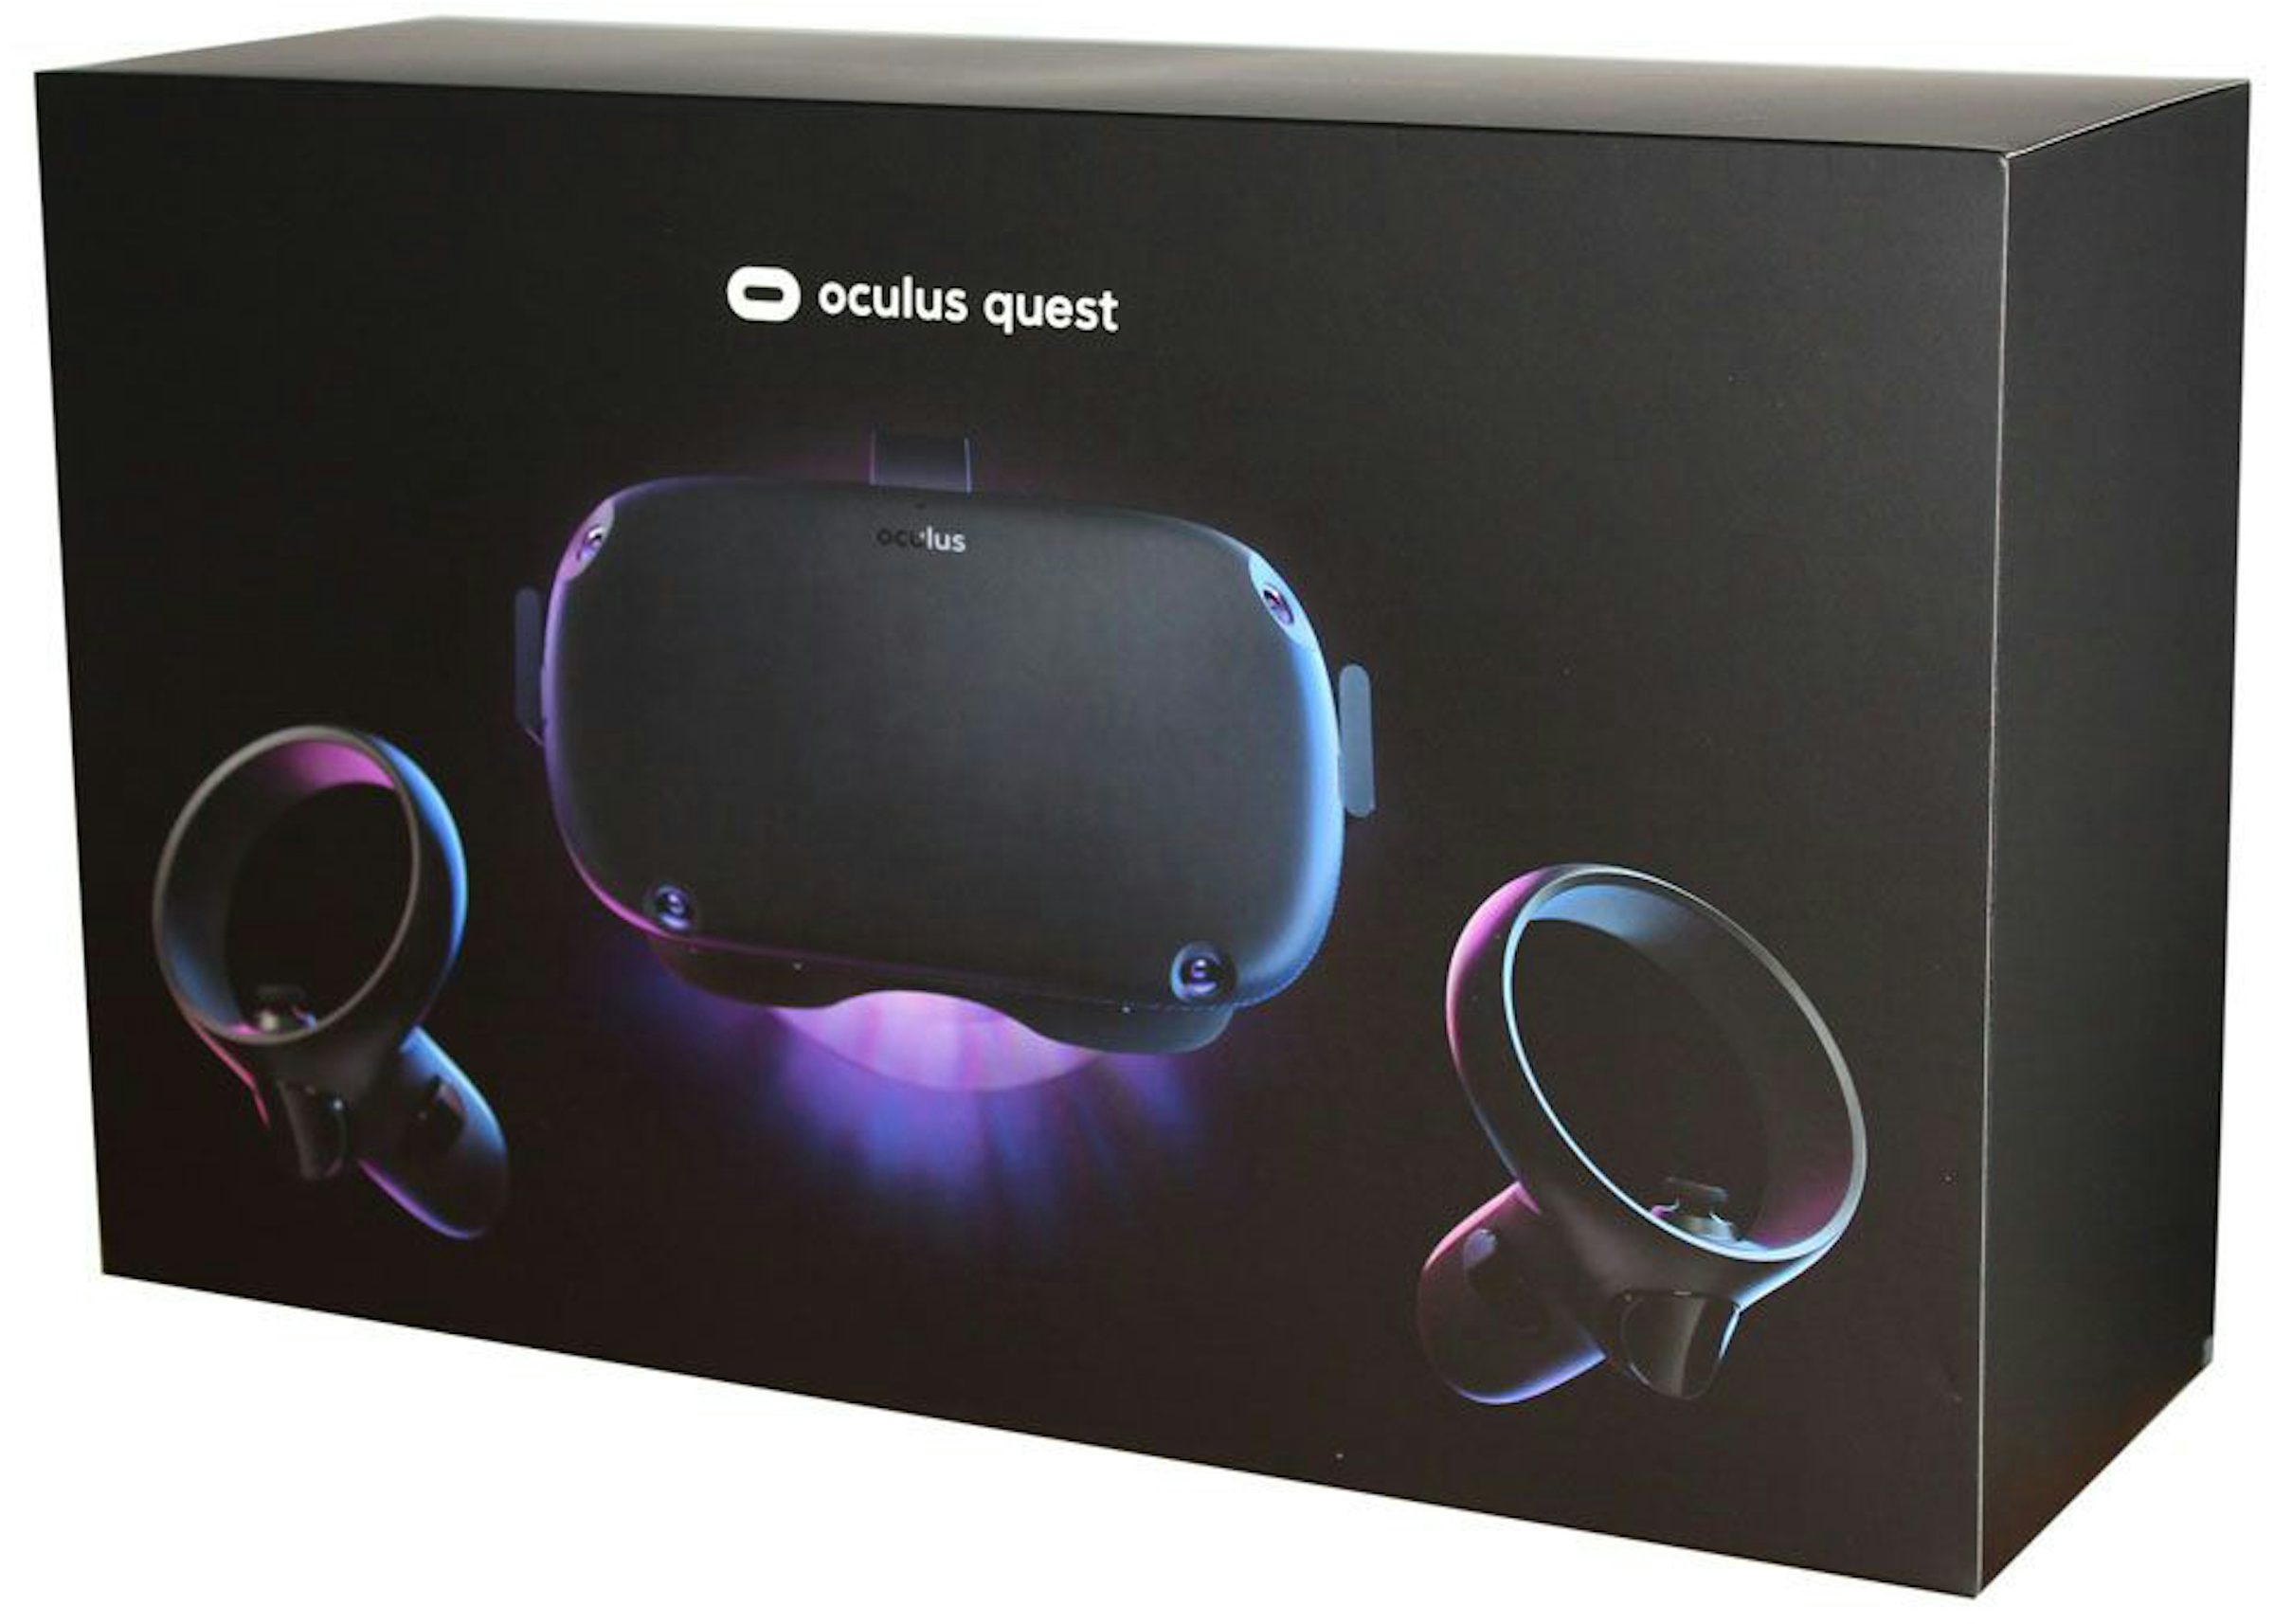 Meta (Oculus) Quest All-In-One VR Headset 64GB Black - US